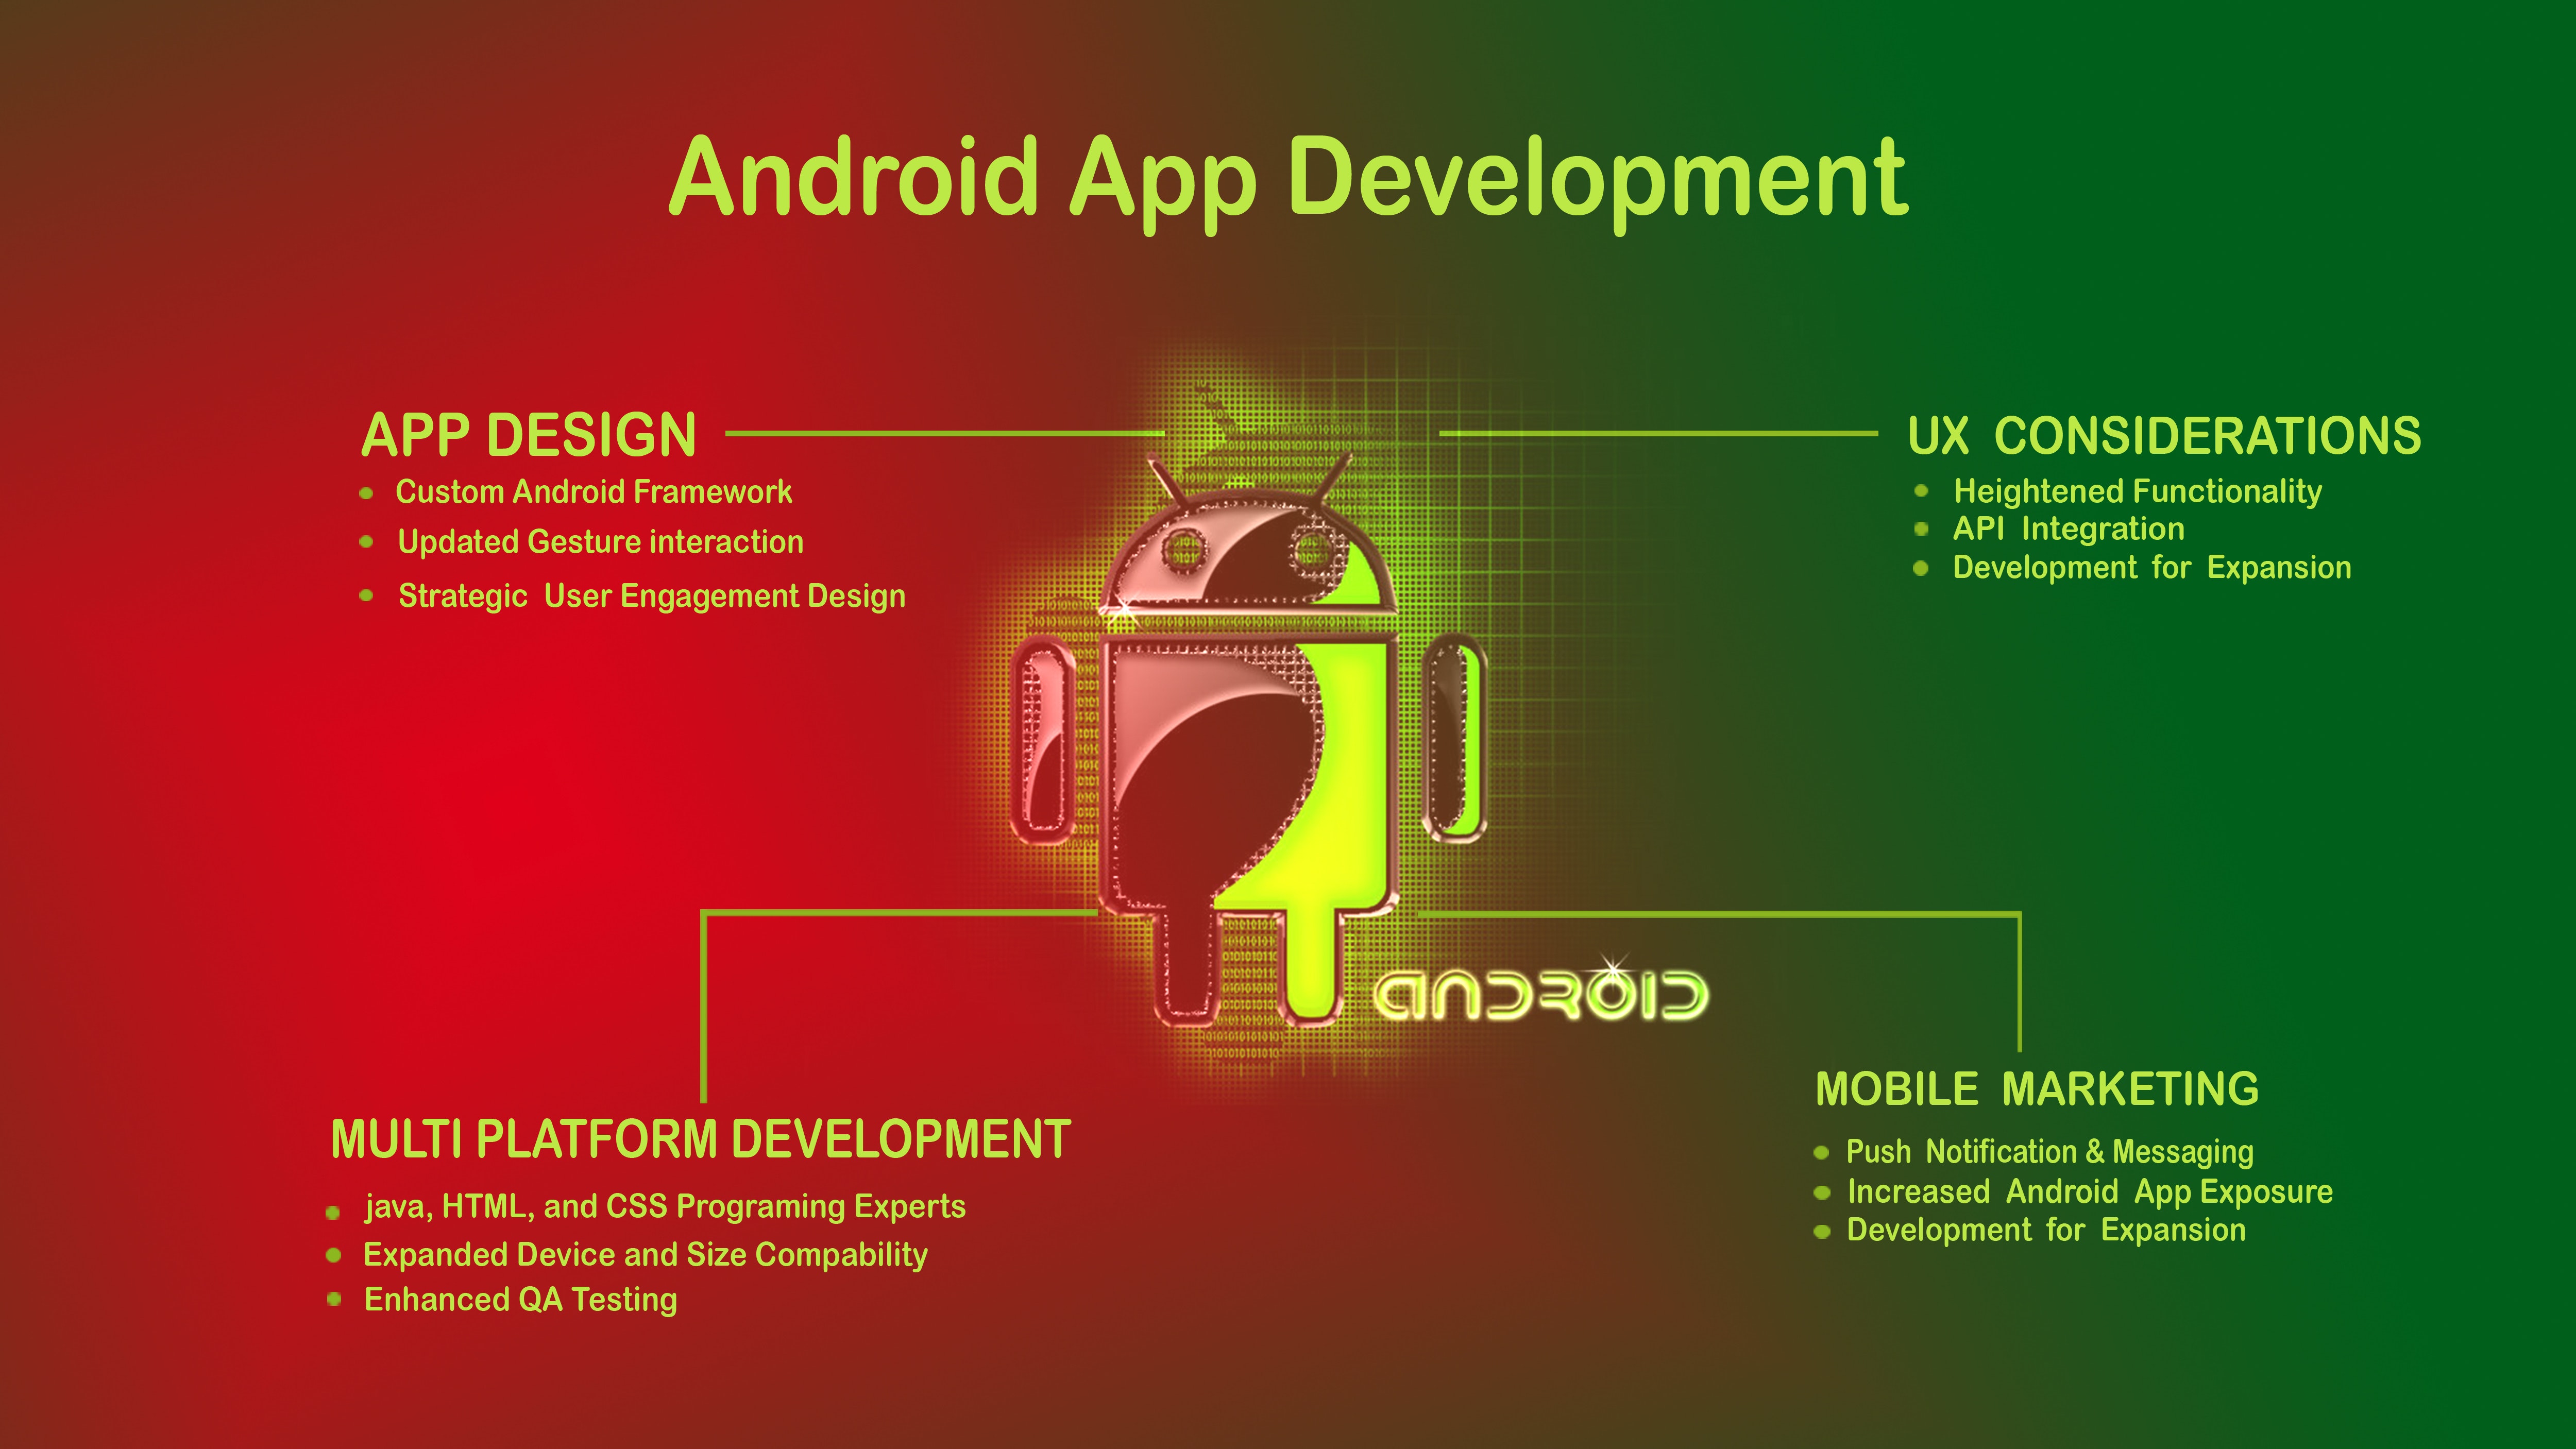 How to Choose an iOS or an Android App Developing Company - Image 1